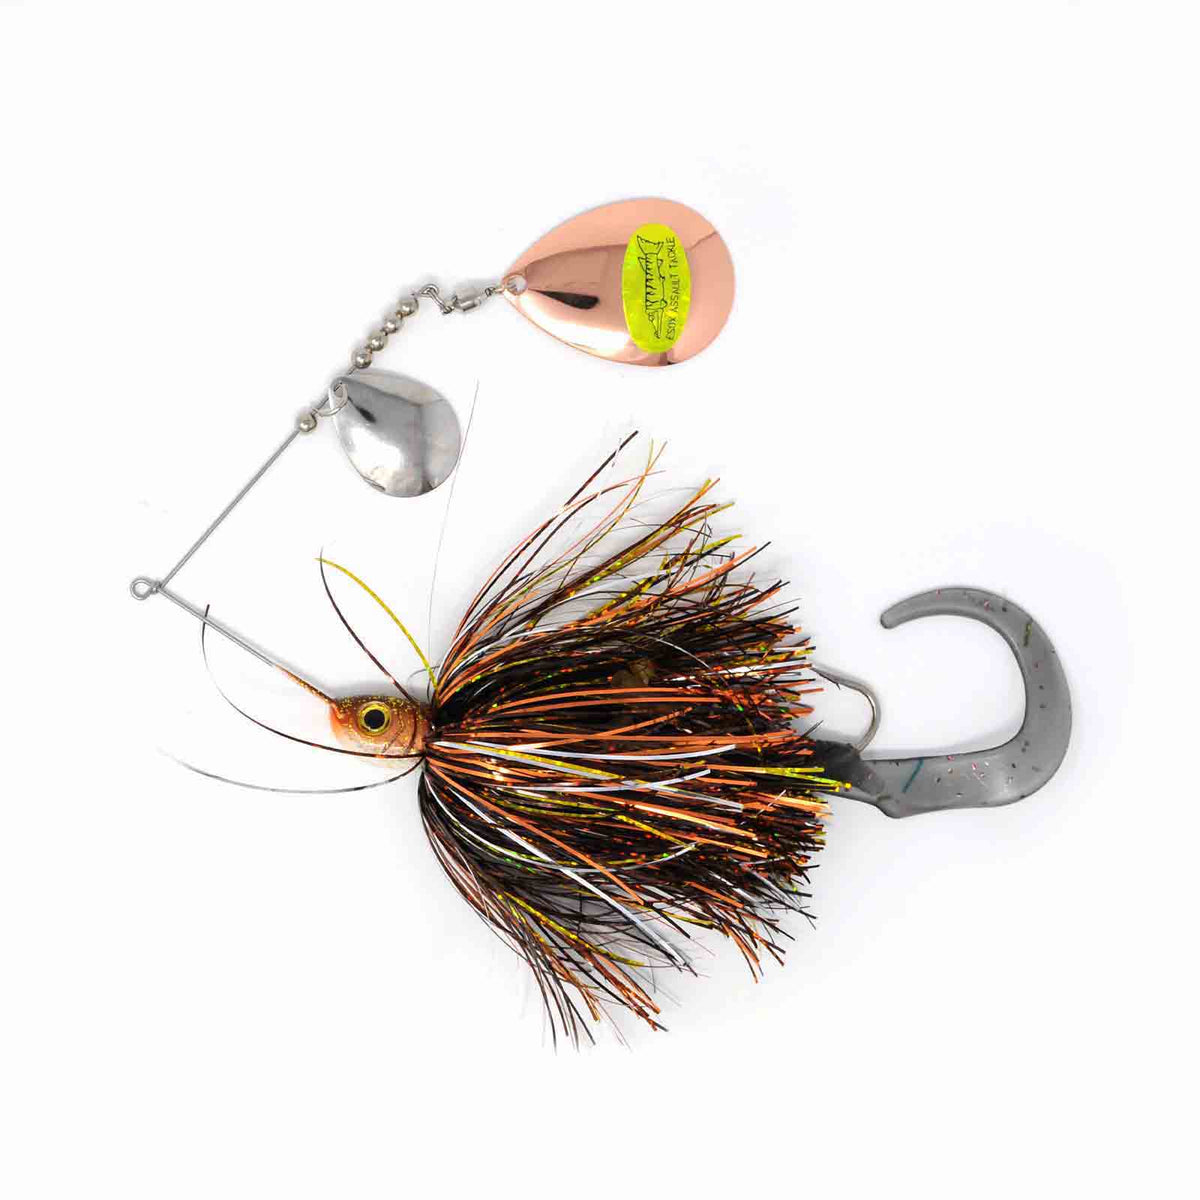 View of Spinnerbaits Esox Assault Spinnerbait Colorado 1oz Killer Korn available at EZOKO Pike and Musky Shop